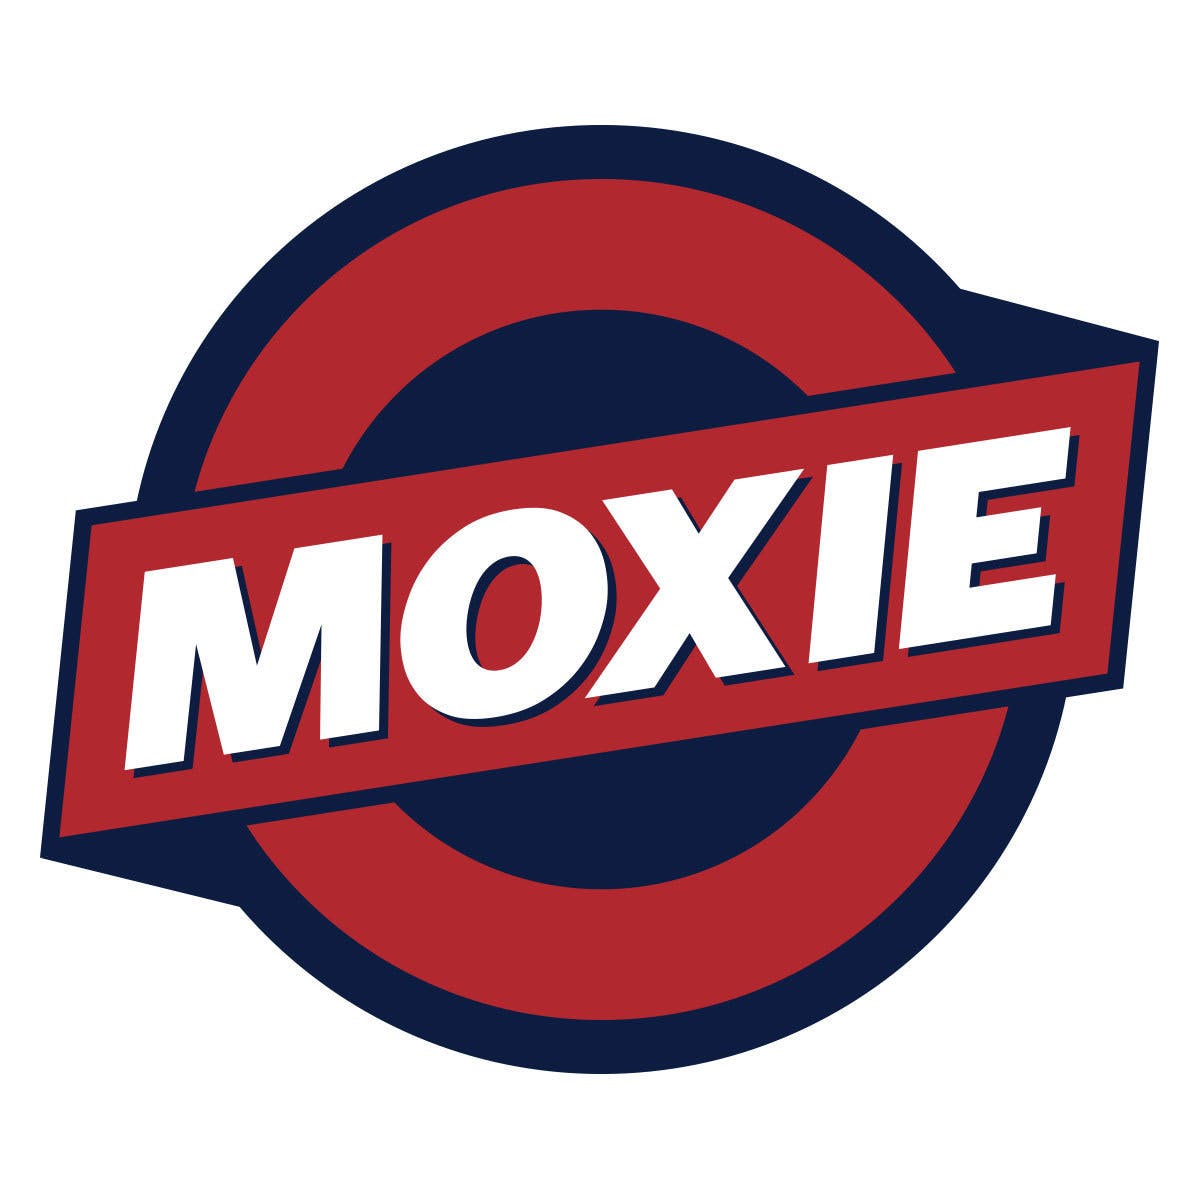 Moxie Logo - Moxie | Featured Products & Details | Weedmaps